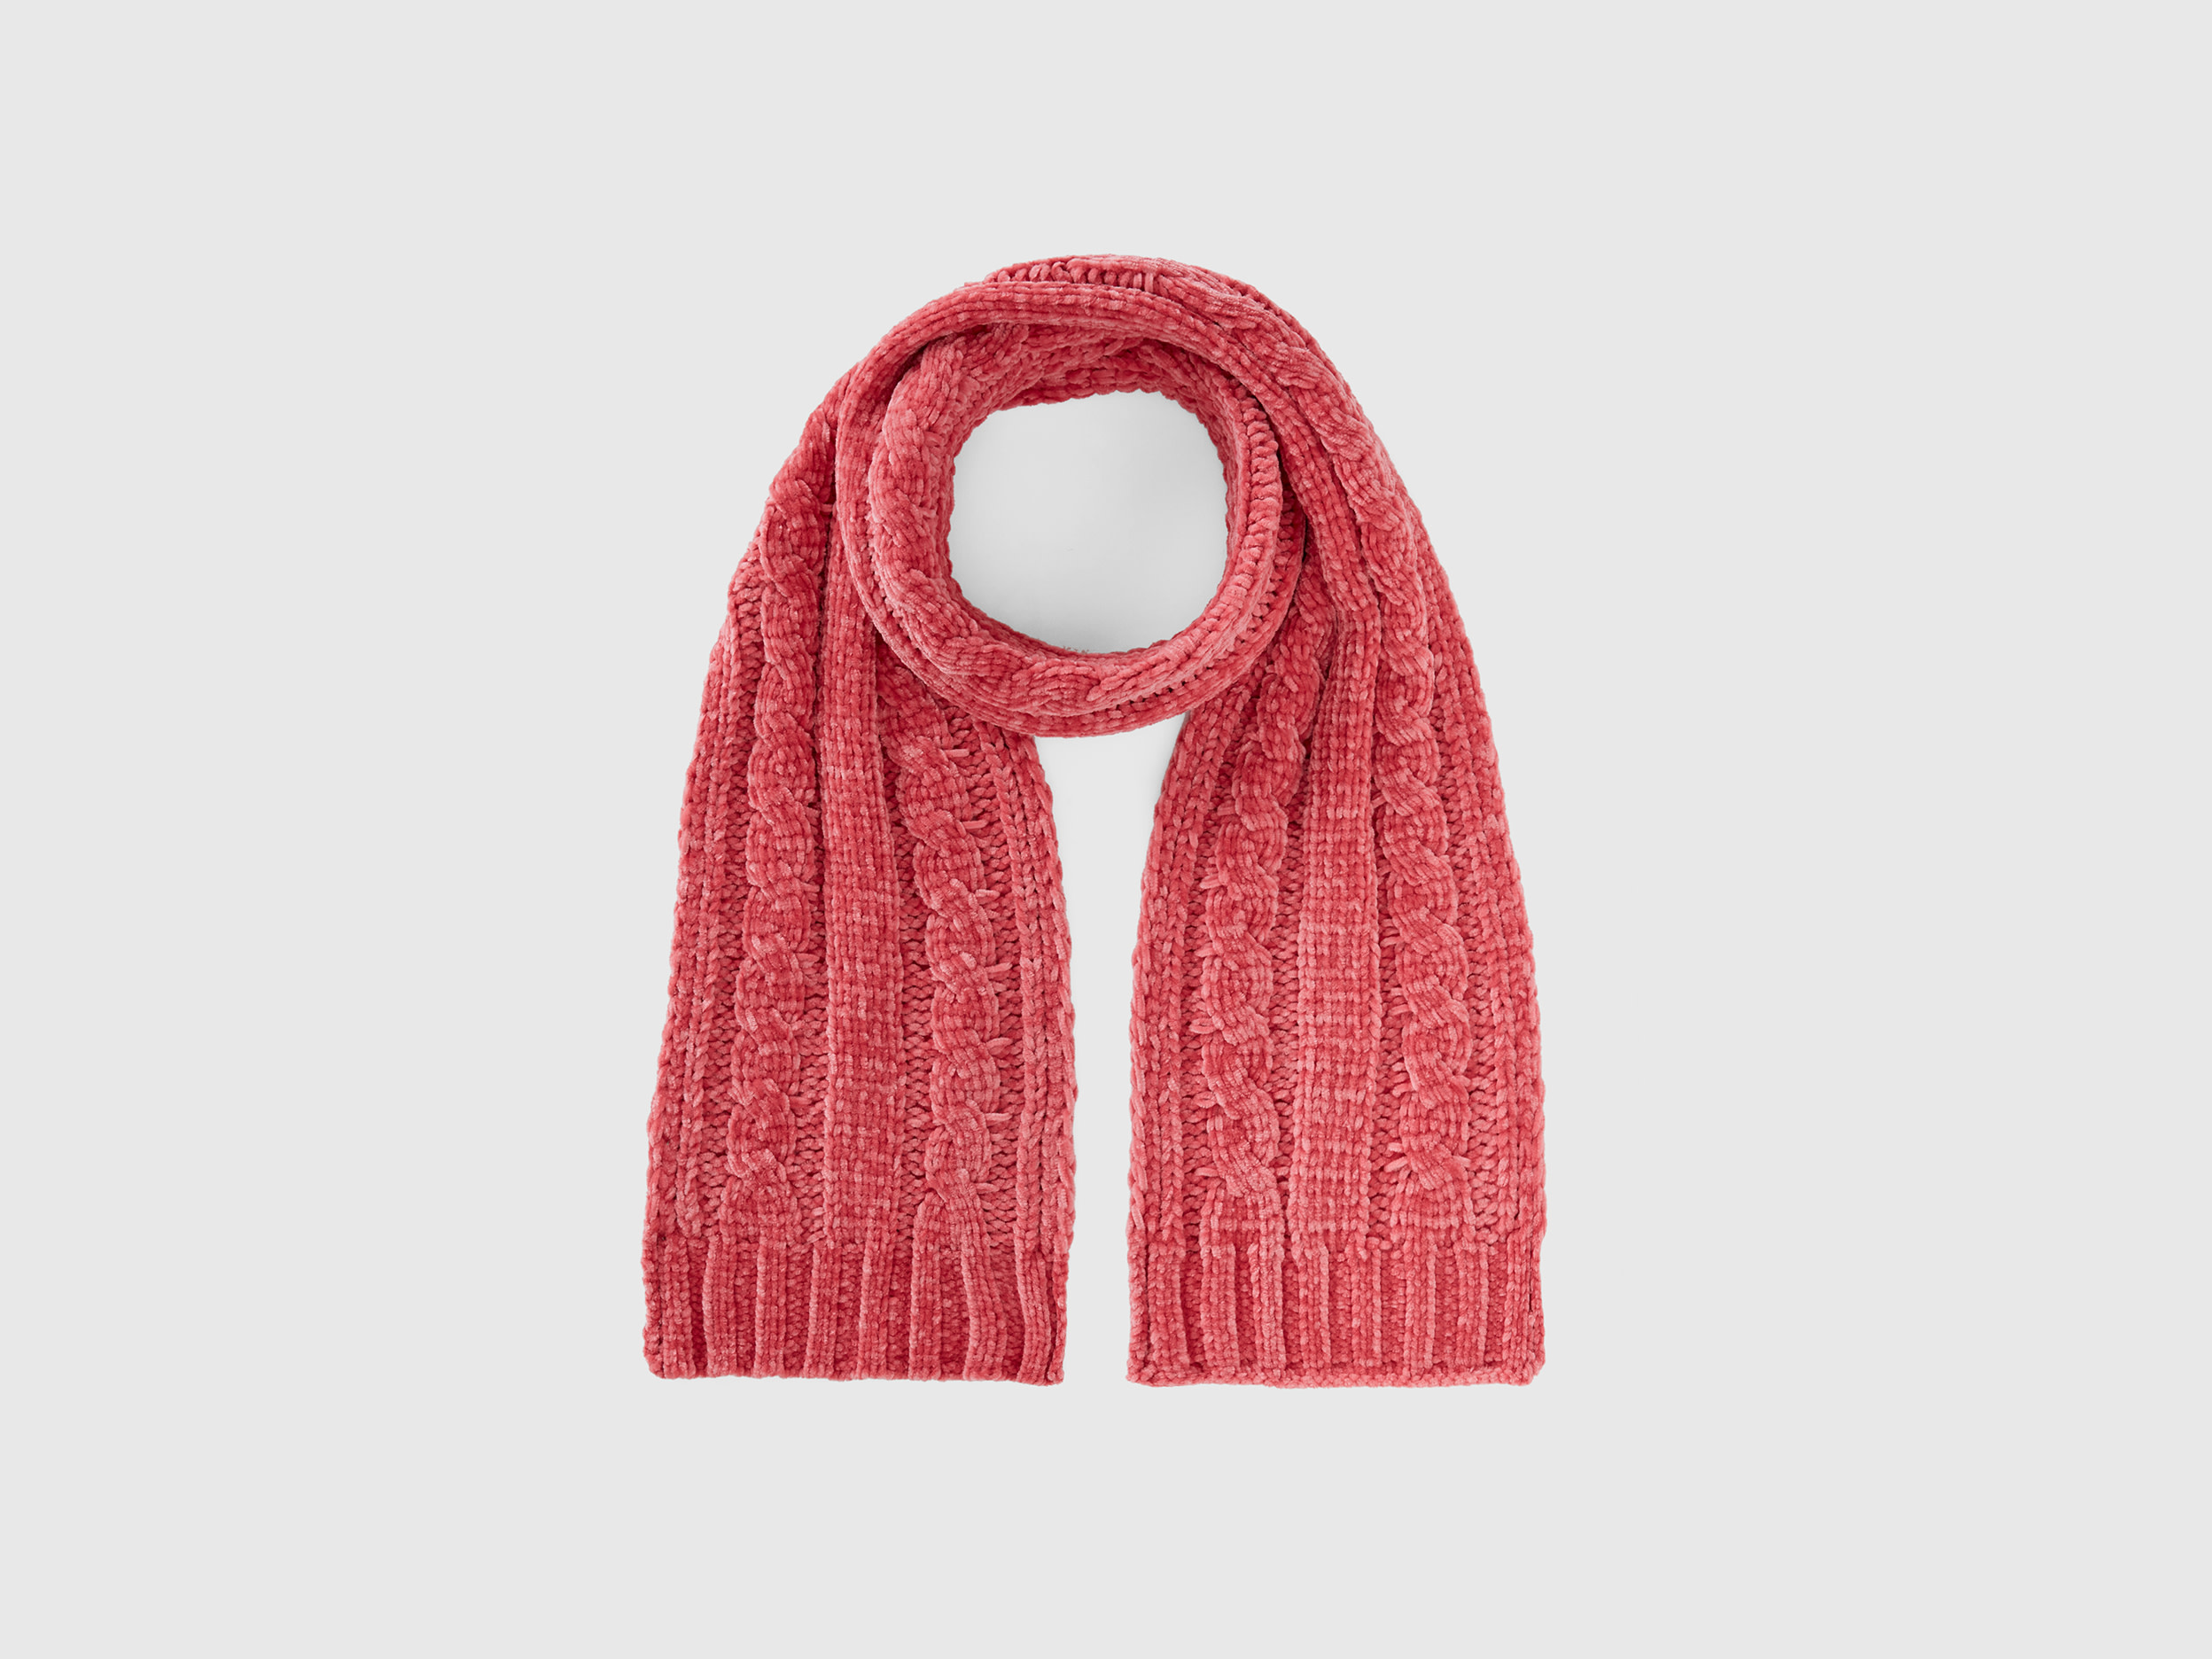 Benetton, Chenille Scarf With Cable Knit, size 1-3, Pink, Kids